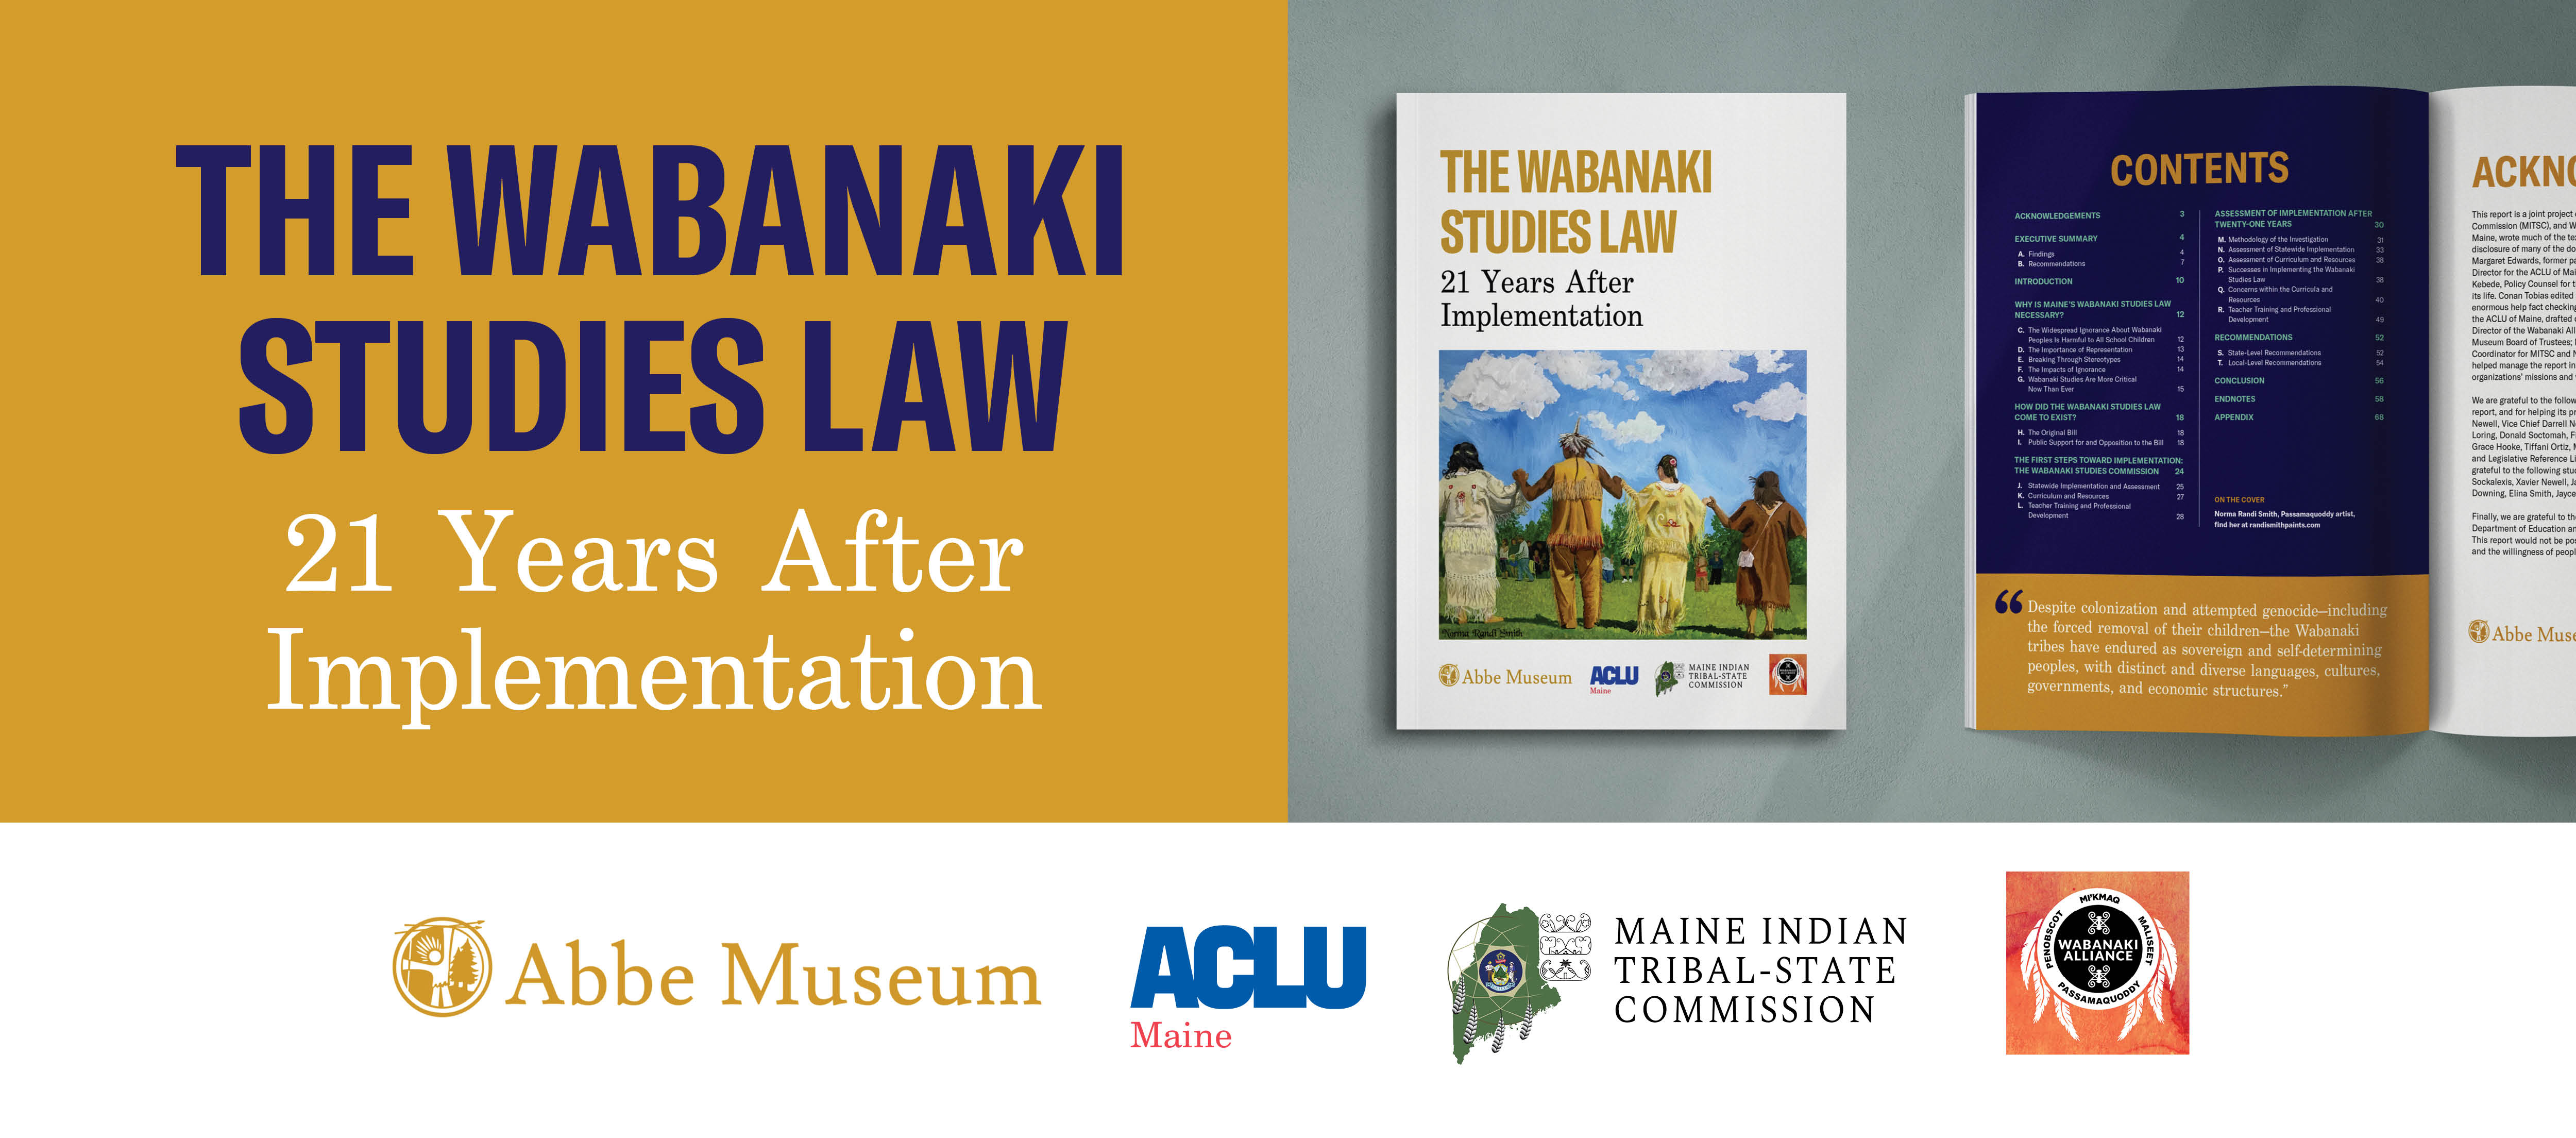 The Wabanaki Studies Law: 21 Years After Implementation